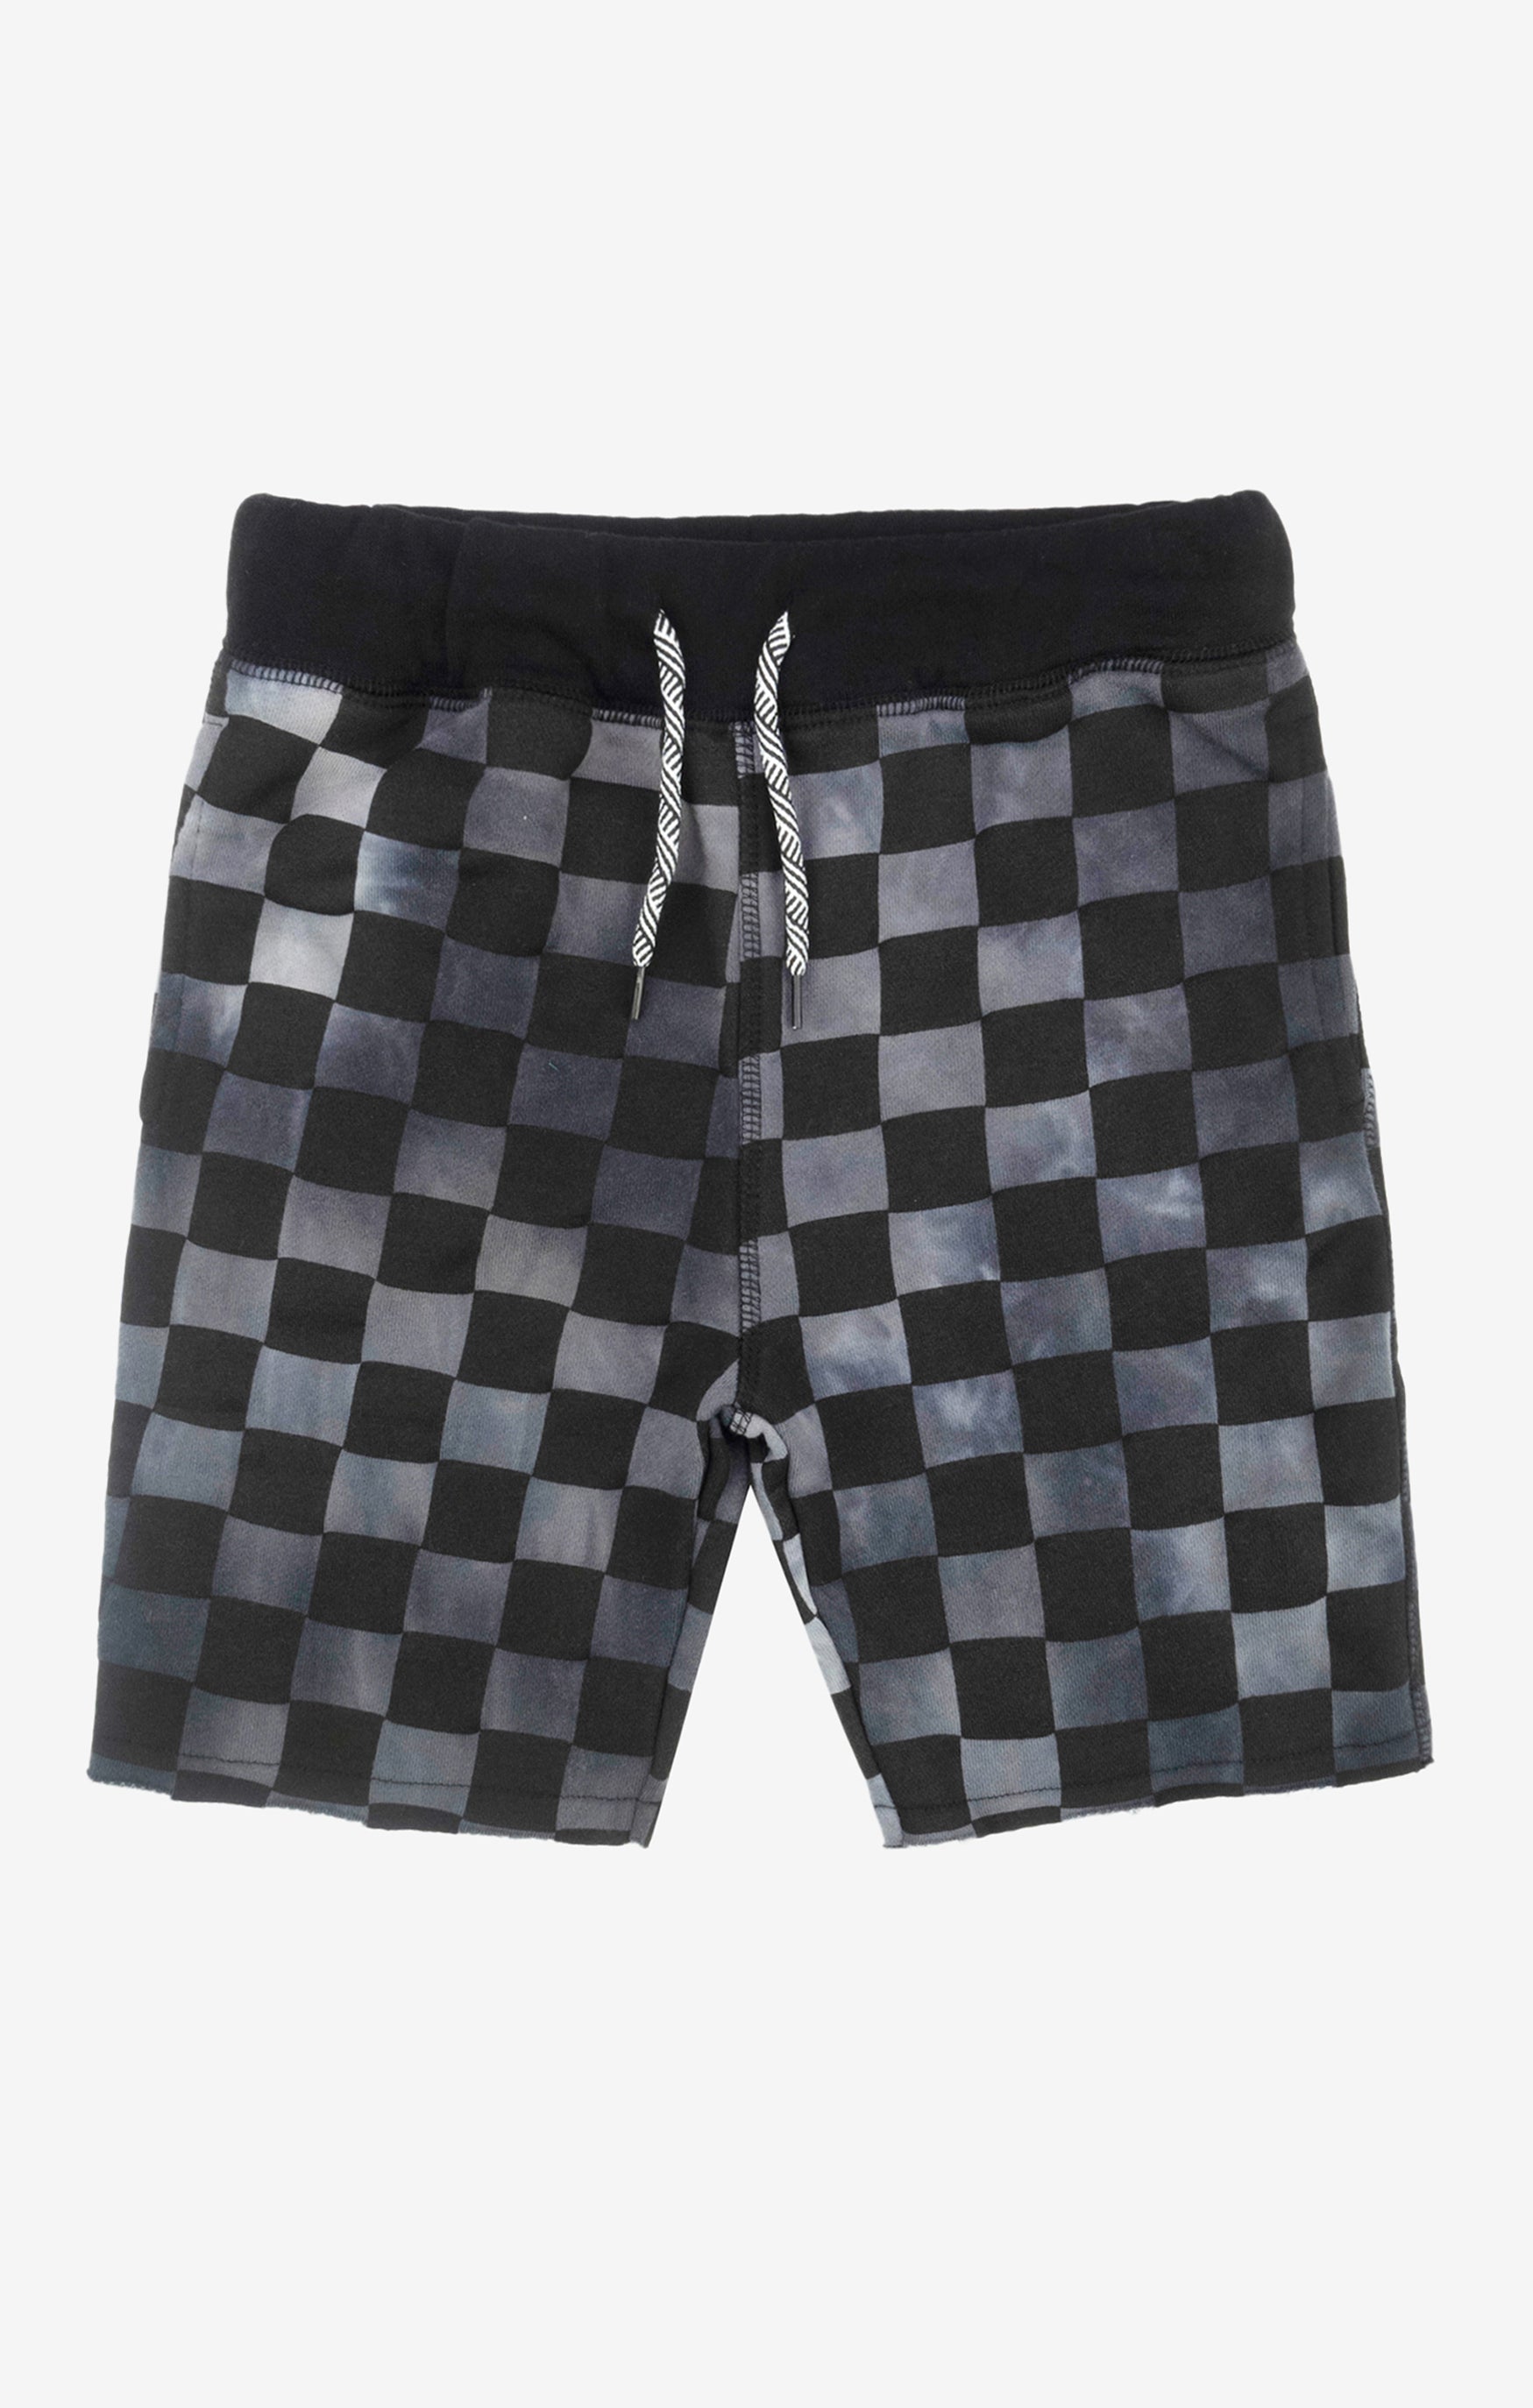 Camp Shorts - Black Check - Twinkle Twinkle Little One